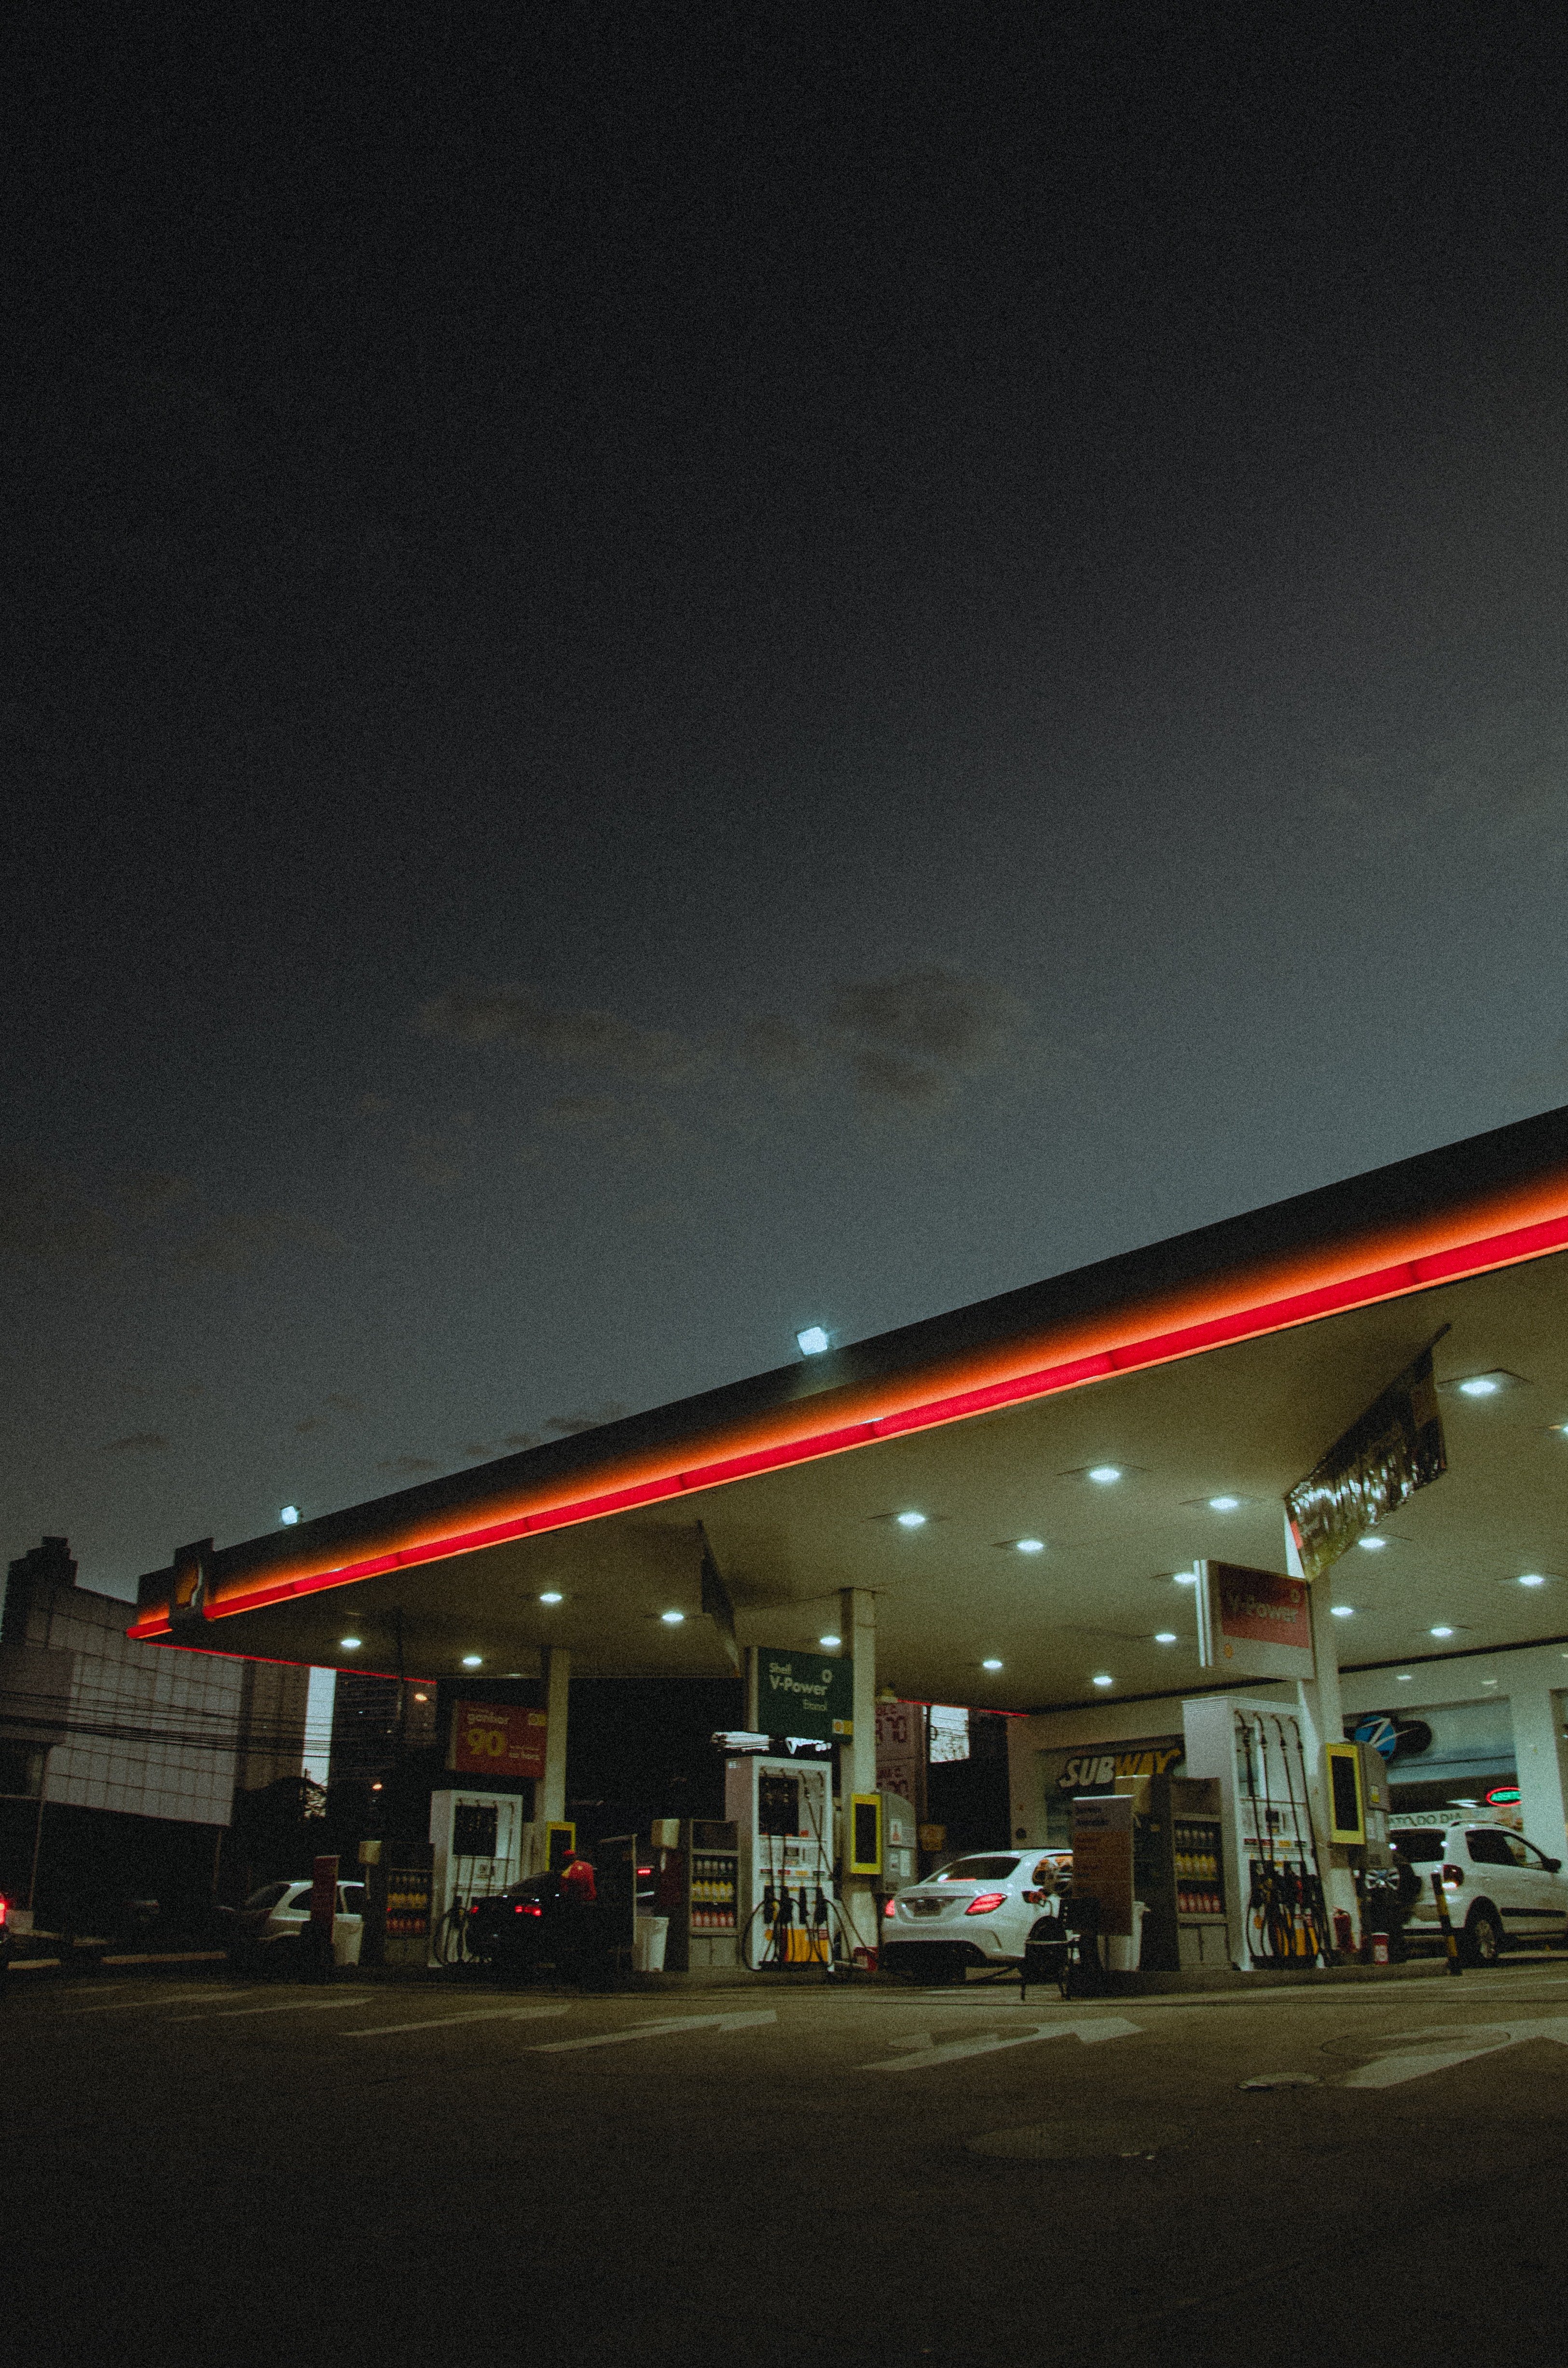 I bumped into John at a gas station—it was truly a strange coincidence | Source: Pexels